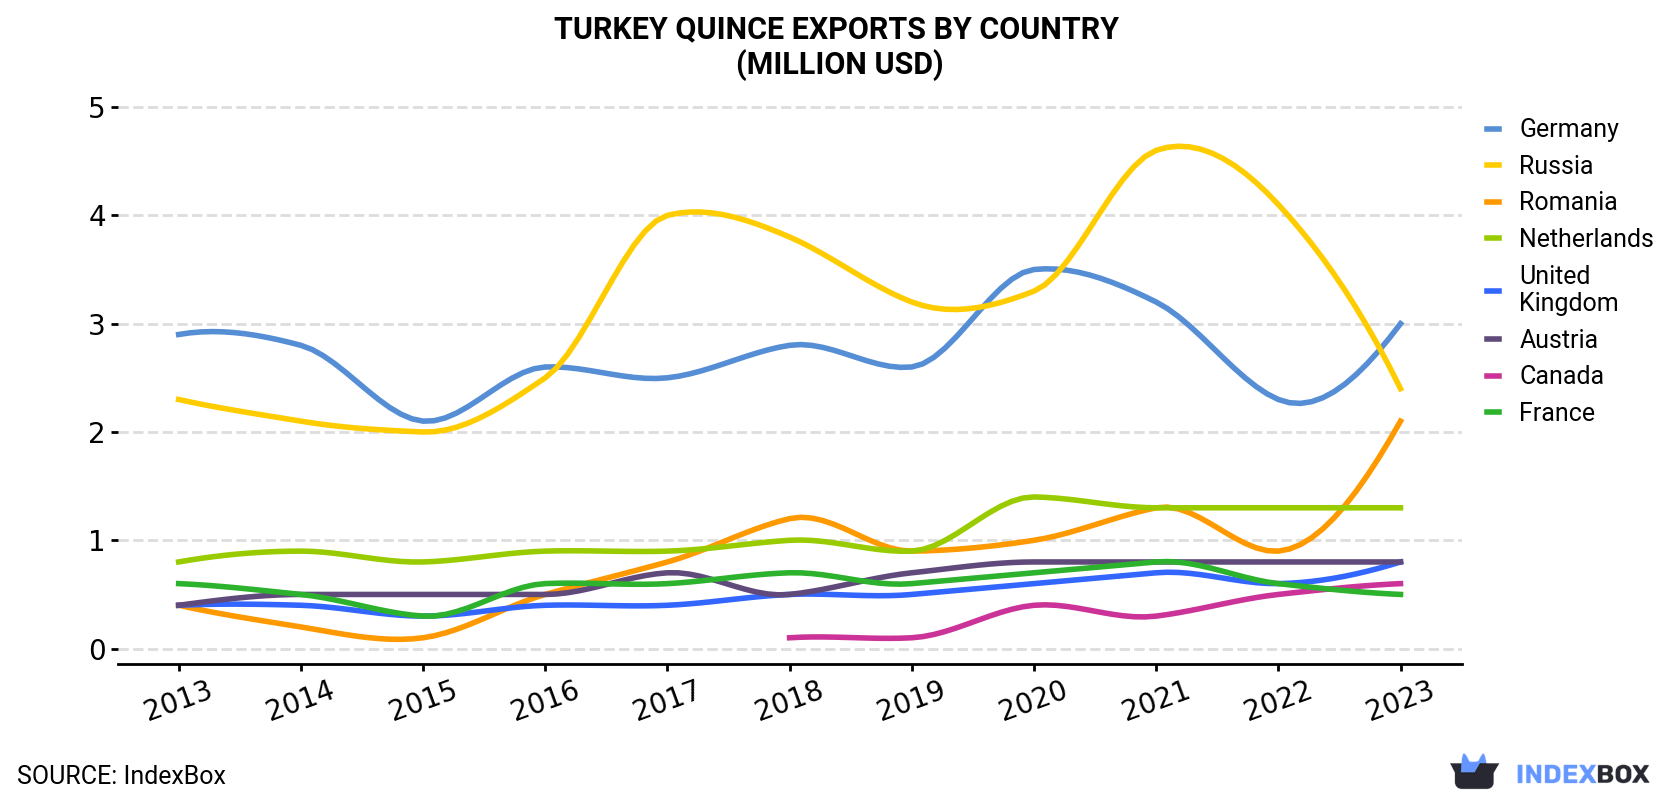 Turkey Quince Exports By Country (Million USD)